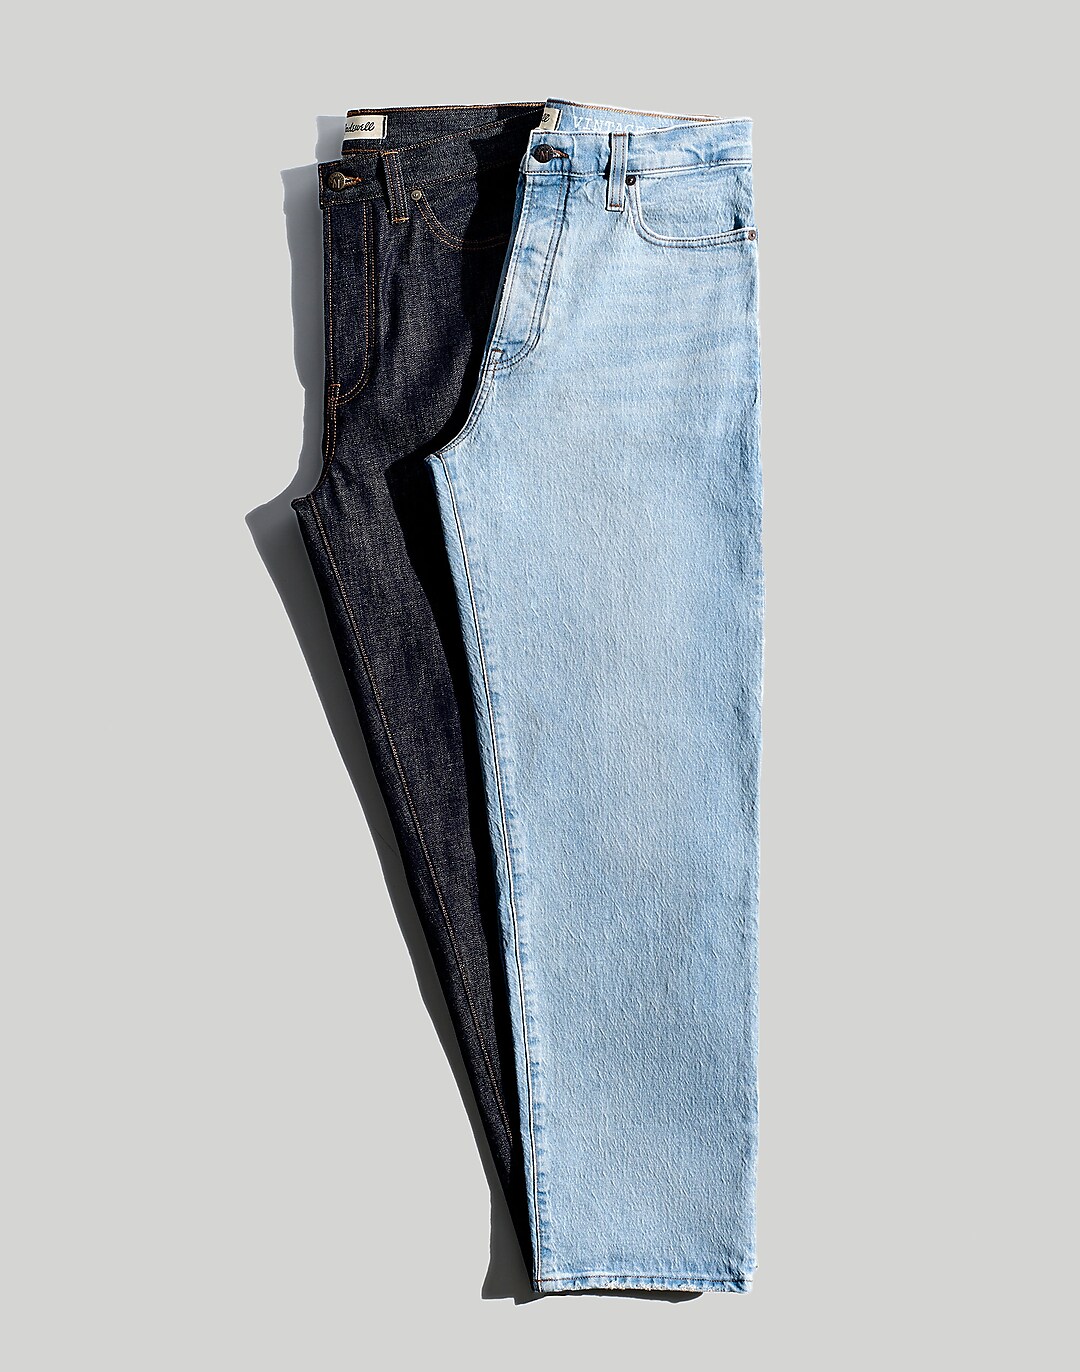 Wash Jeans Indigo in Straight Vintage Raw Relaxed